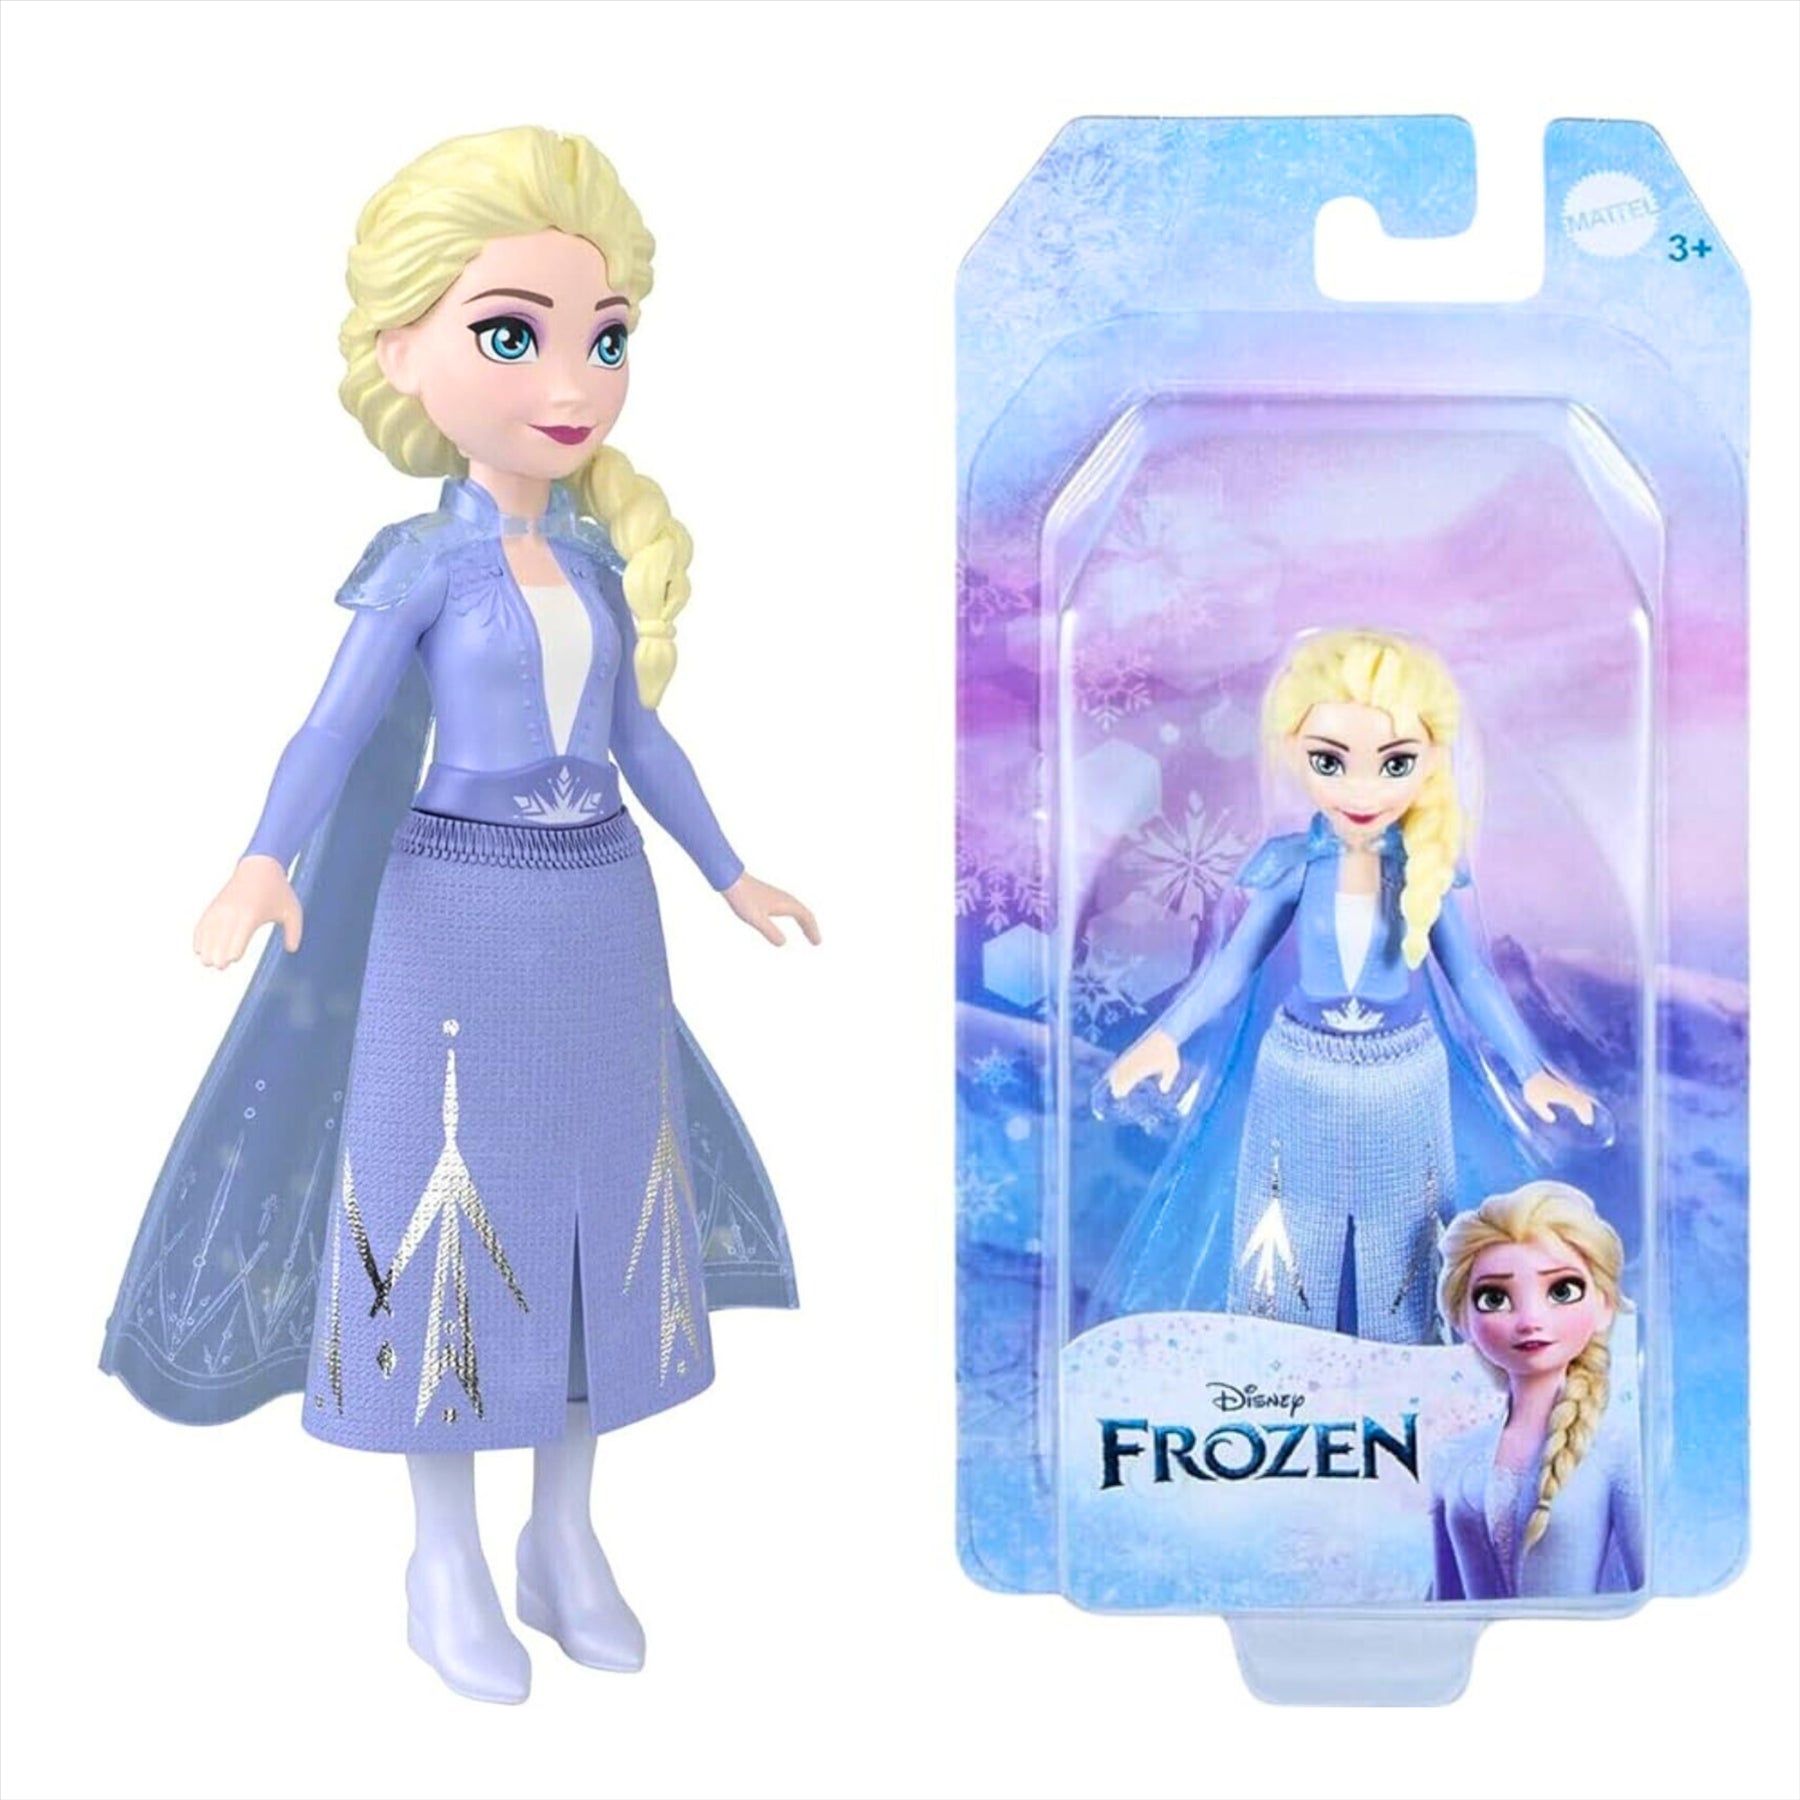 Disney Frozen Elsa and Anna 10cm Articulated Action Figure Play Toys - Twin Pack